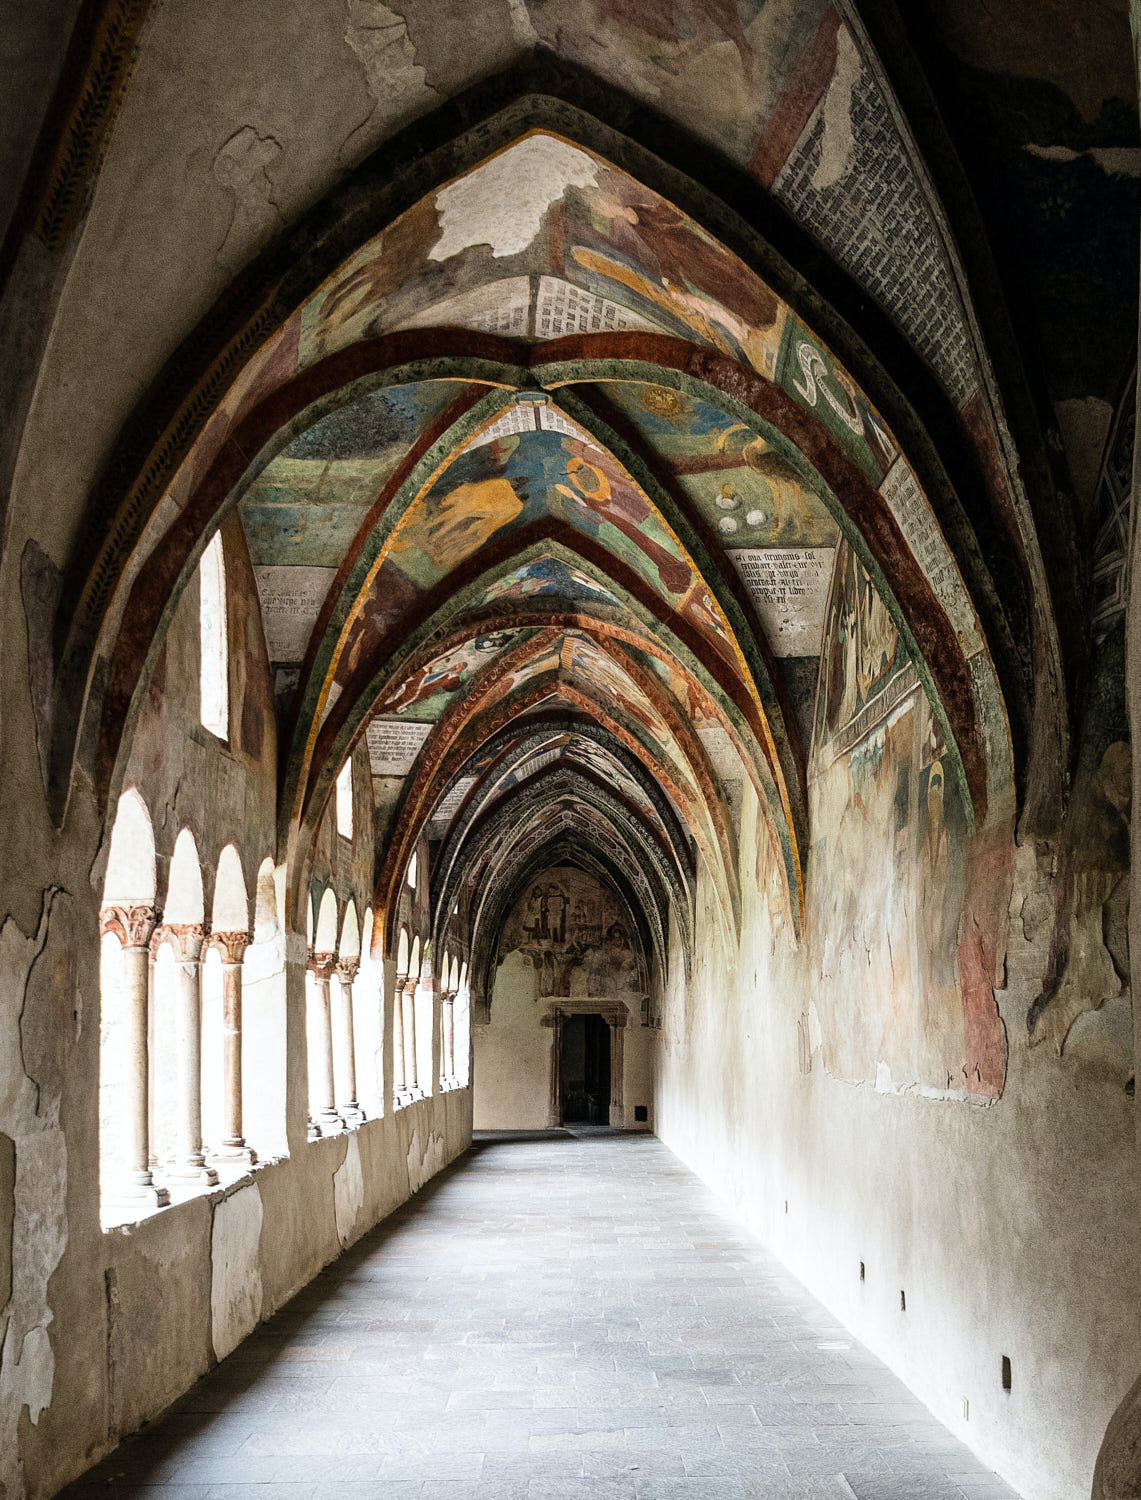 Colorfully painted vault of the Bressanone monastery